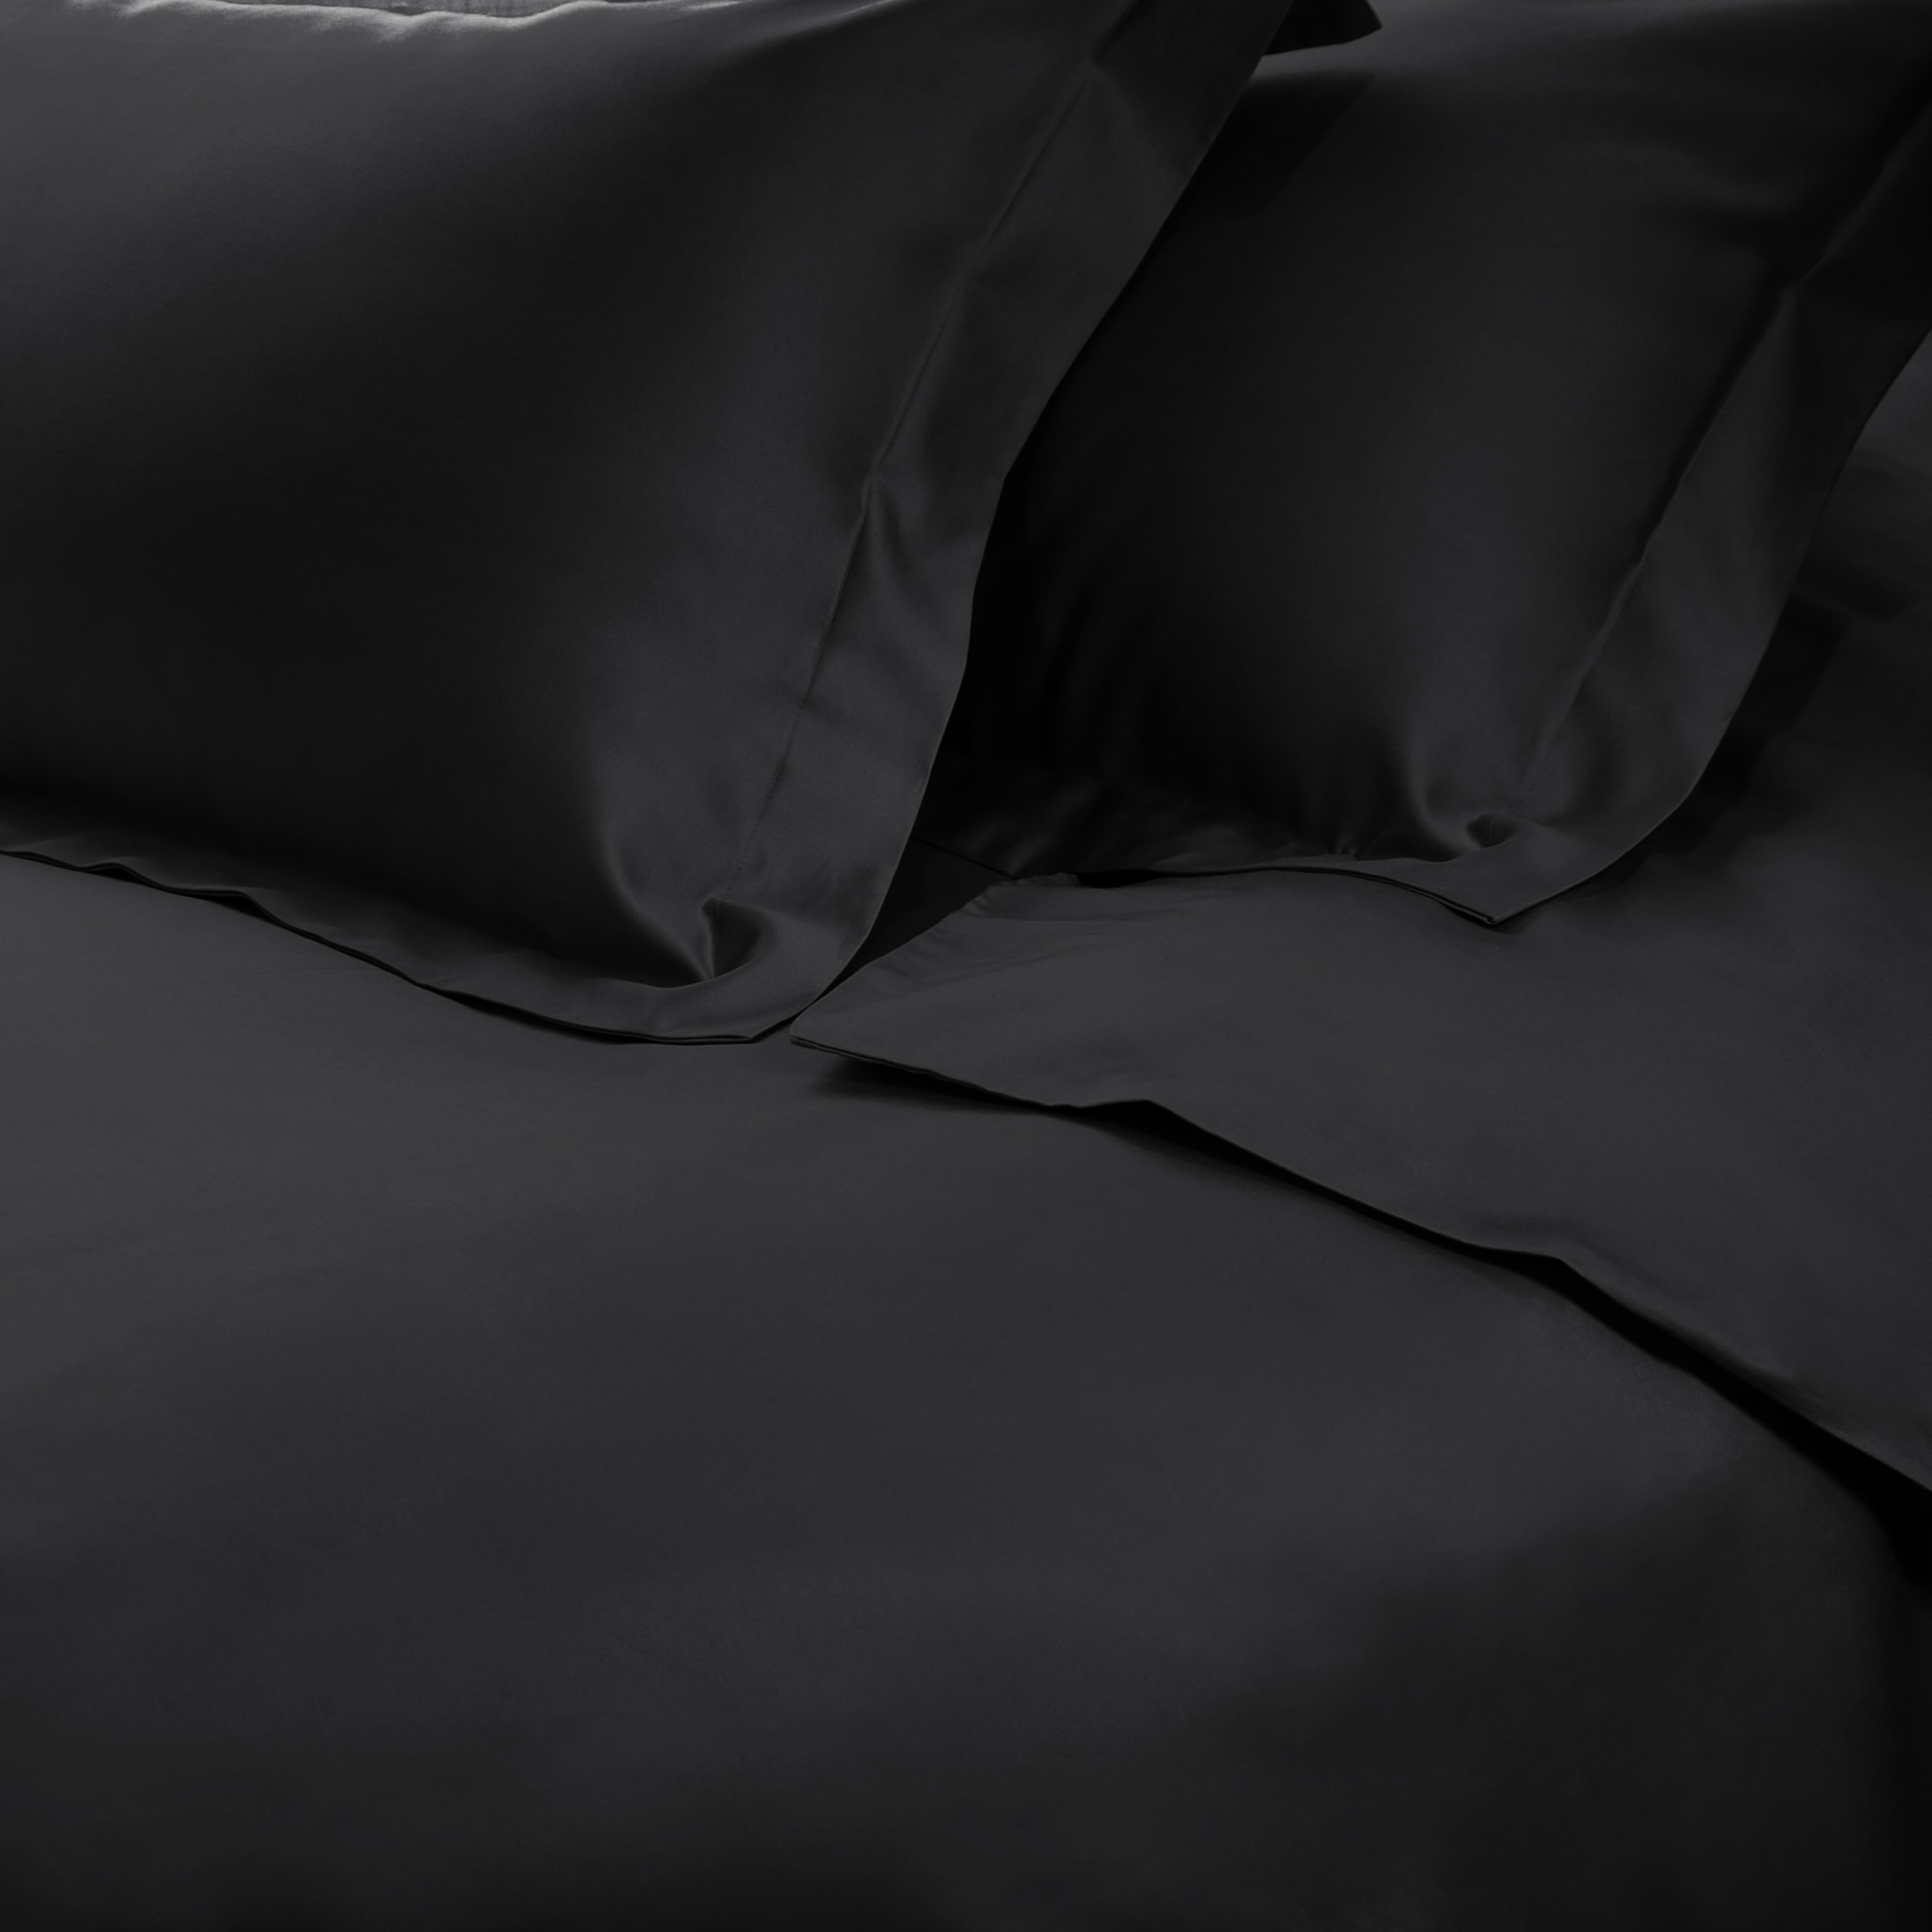 Egyptian Cotton Glamorous Black Bedding Collection Solid Choose Item & AU Size 